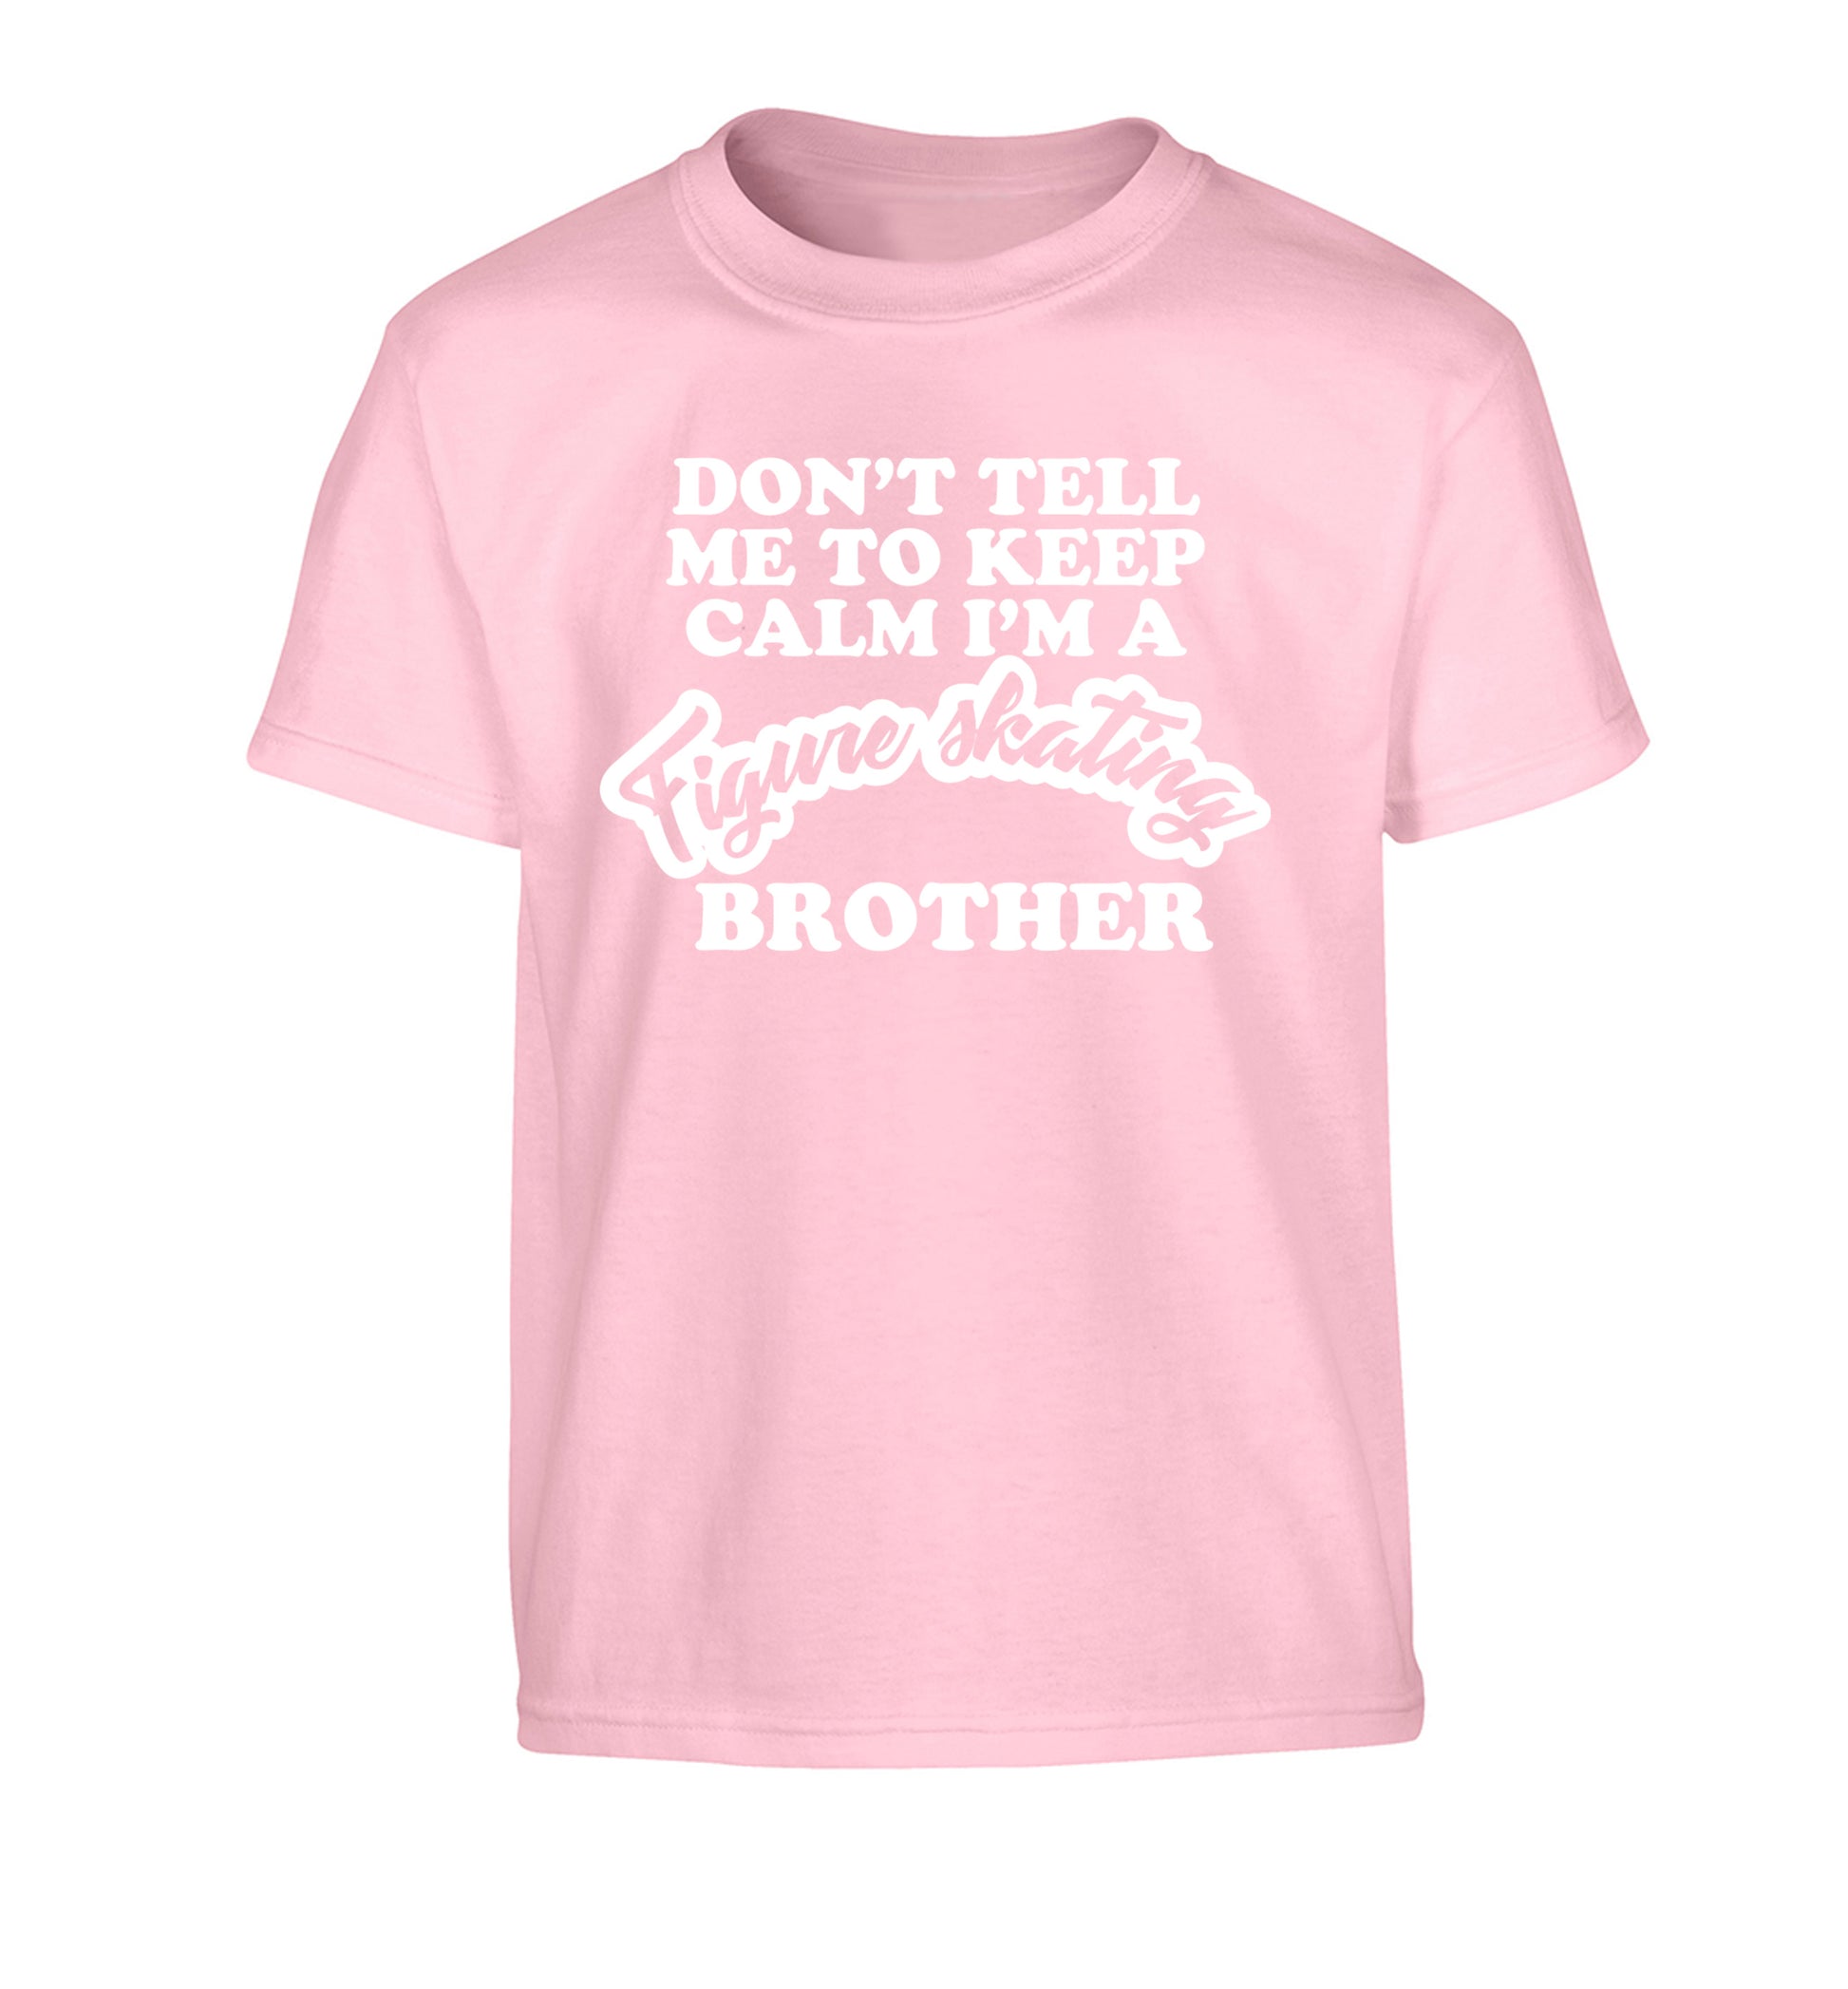 Don't tell me to keep calm I'm a figure skating brother Children's light pink Tshirt 12-14 Years